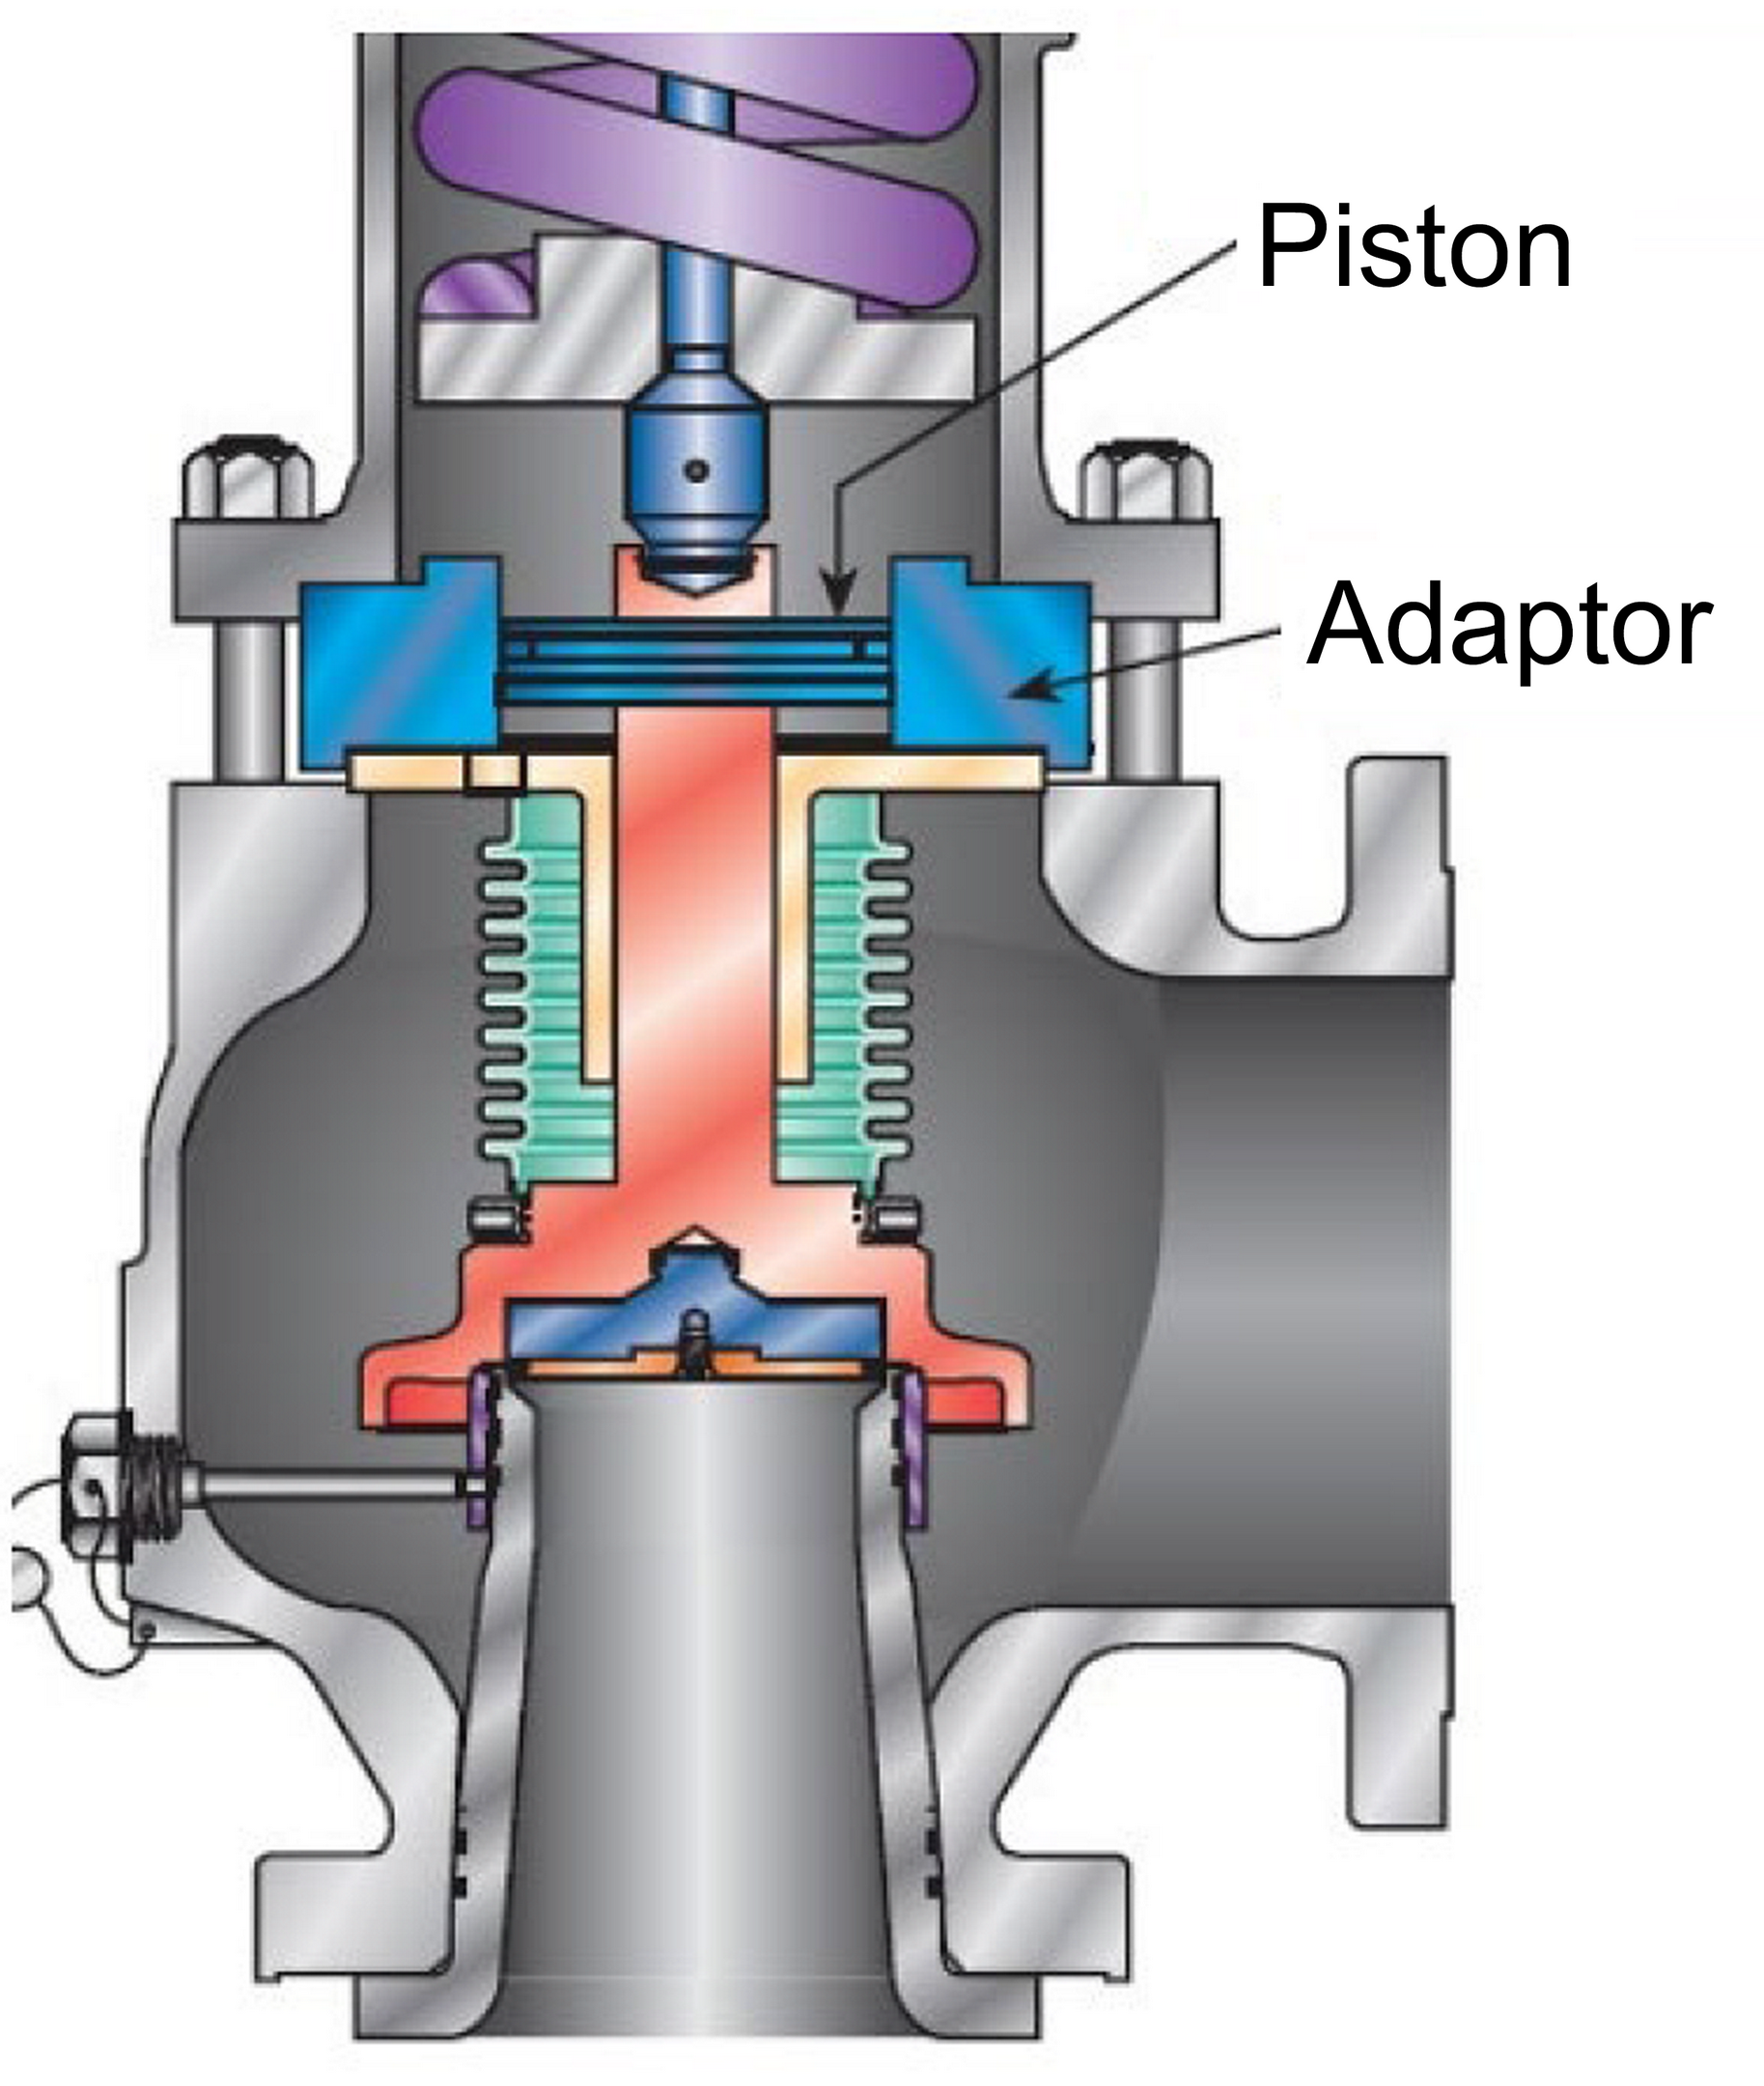 Installation of a piston above the bellows allows the PRV to still operate at setpoint, even with damage to the bellows.